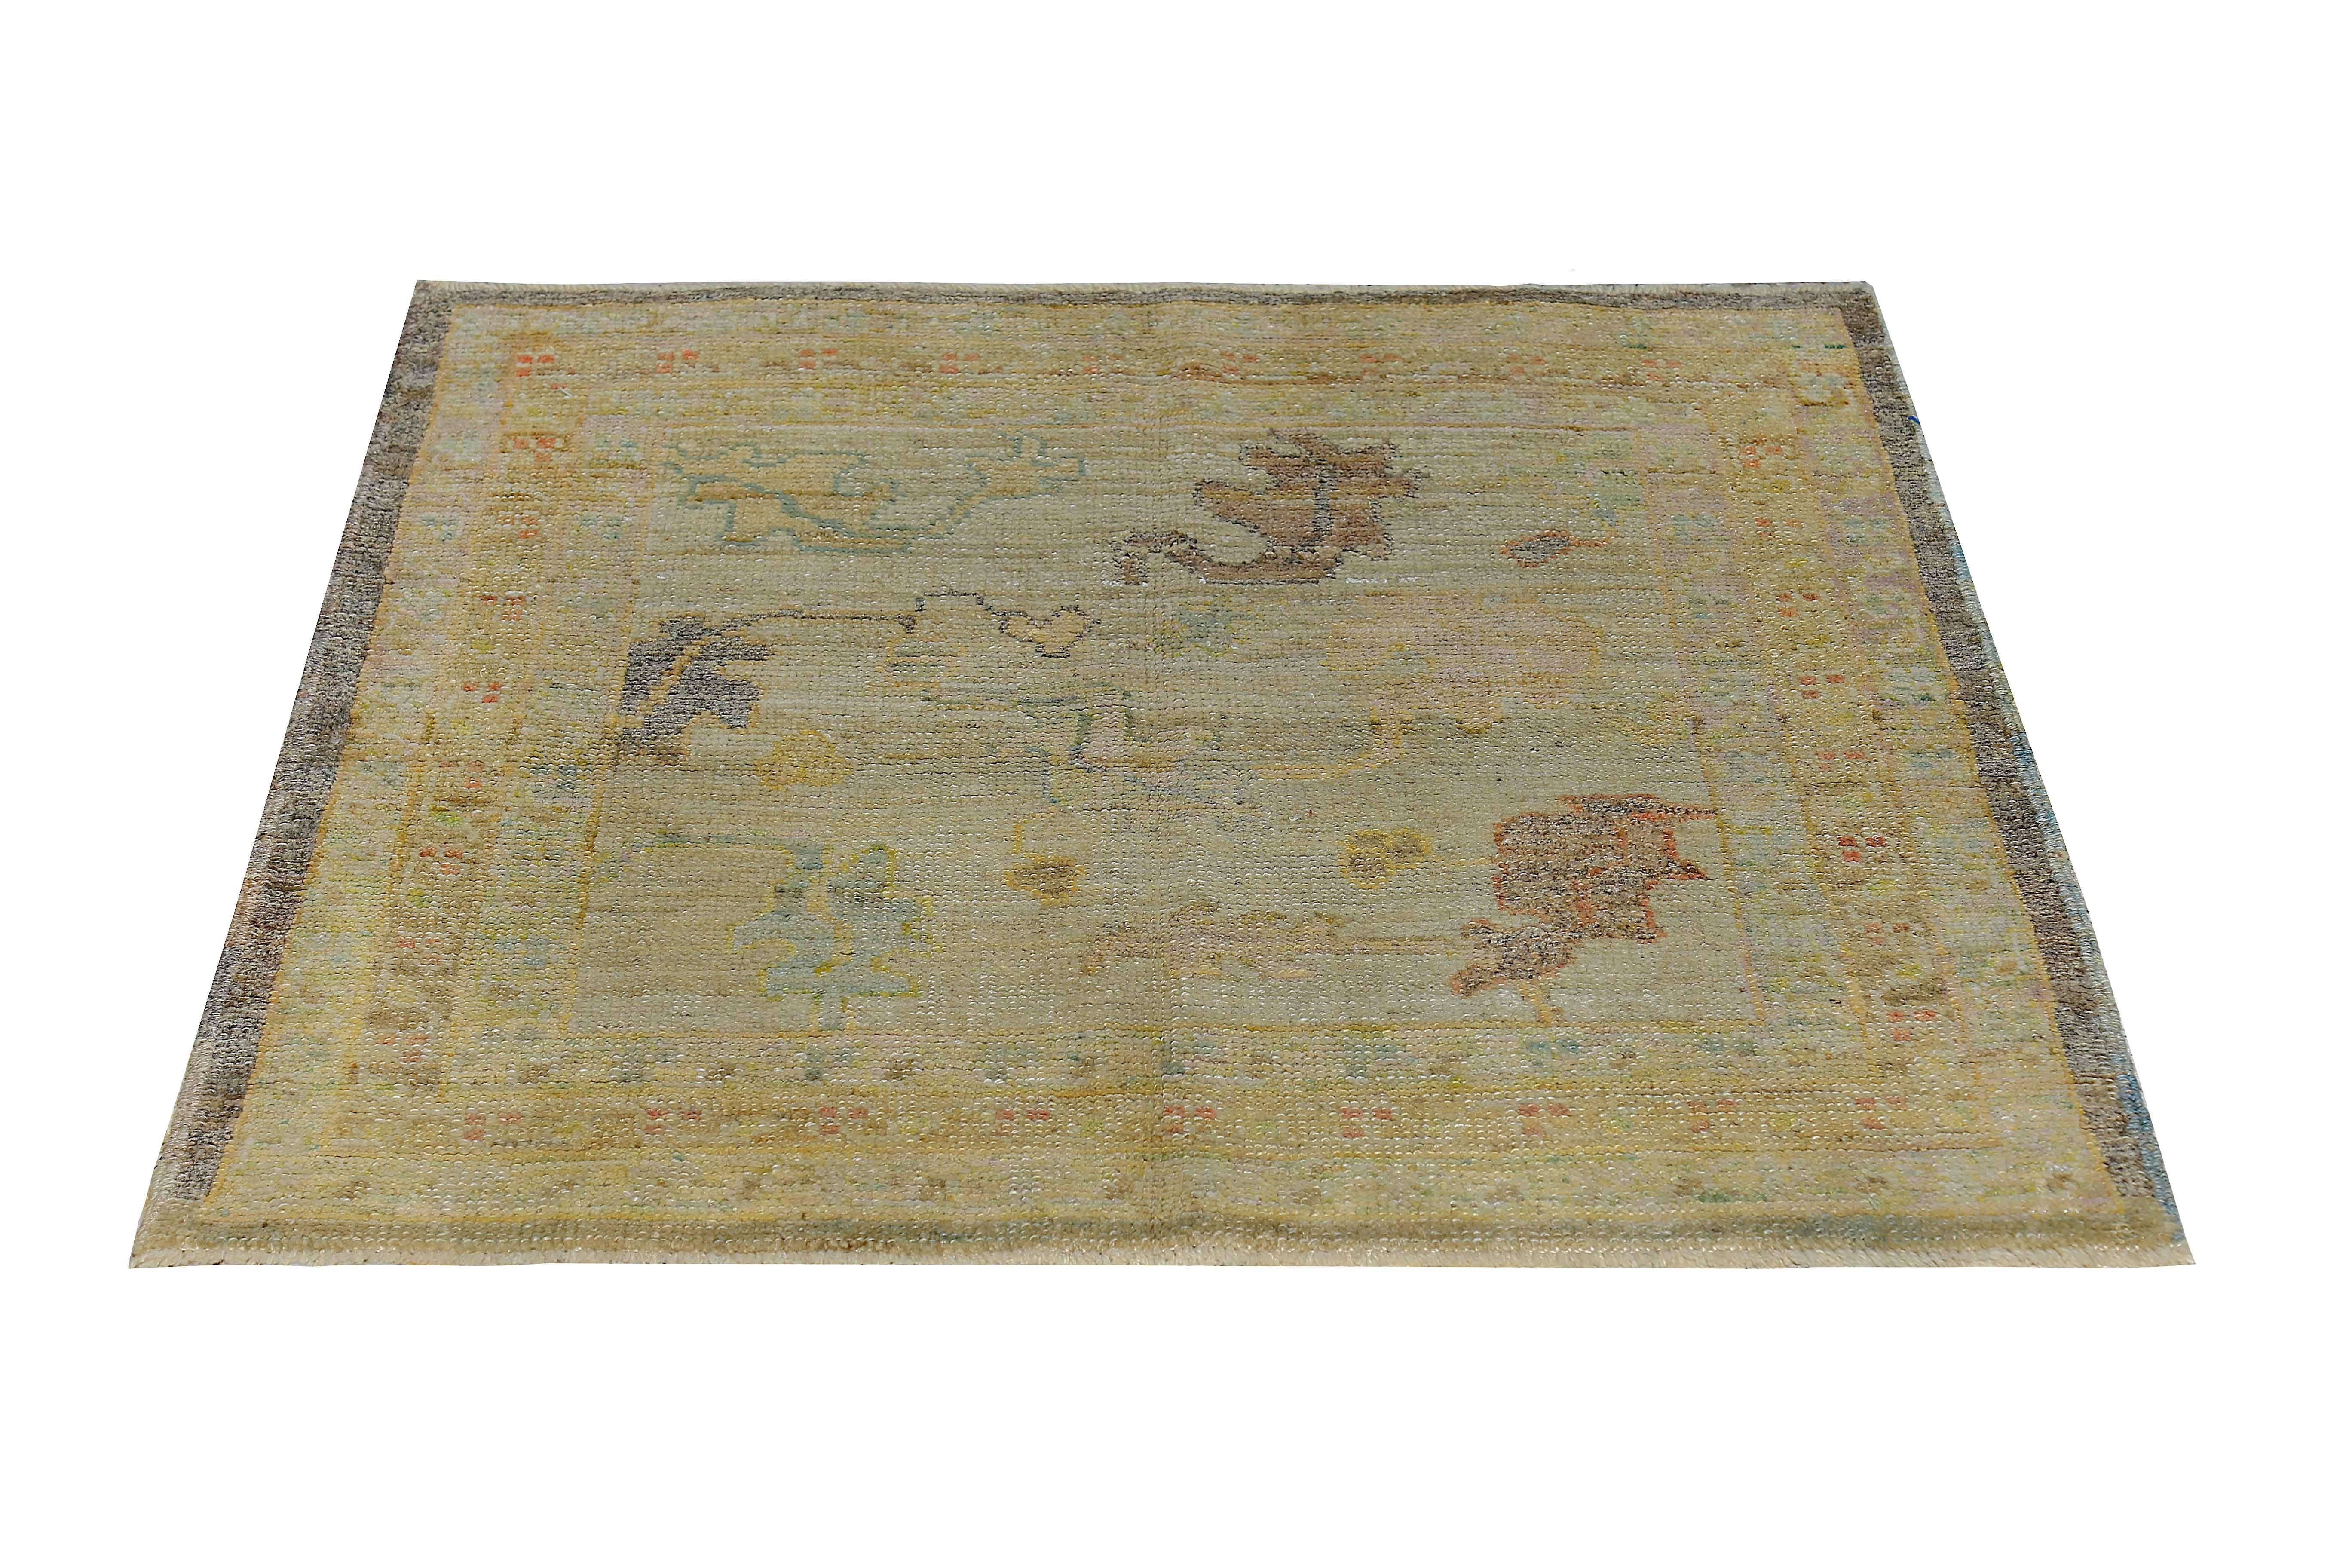 New Turkish rug made of handwoven sheep’s wool of the finest quality. It’s colored with organic vegetable dyes that are certified safe for humans and pets alike. It features brown and gold floral details on a beautiful ivory field. Flower patterns